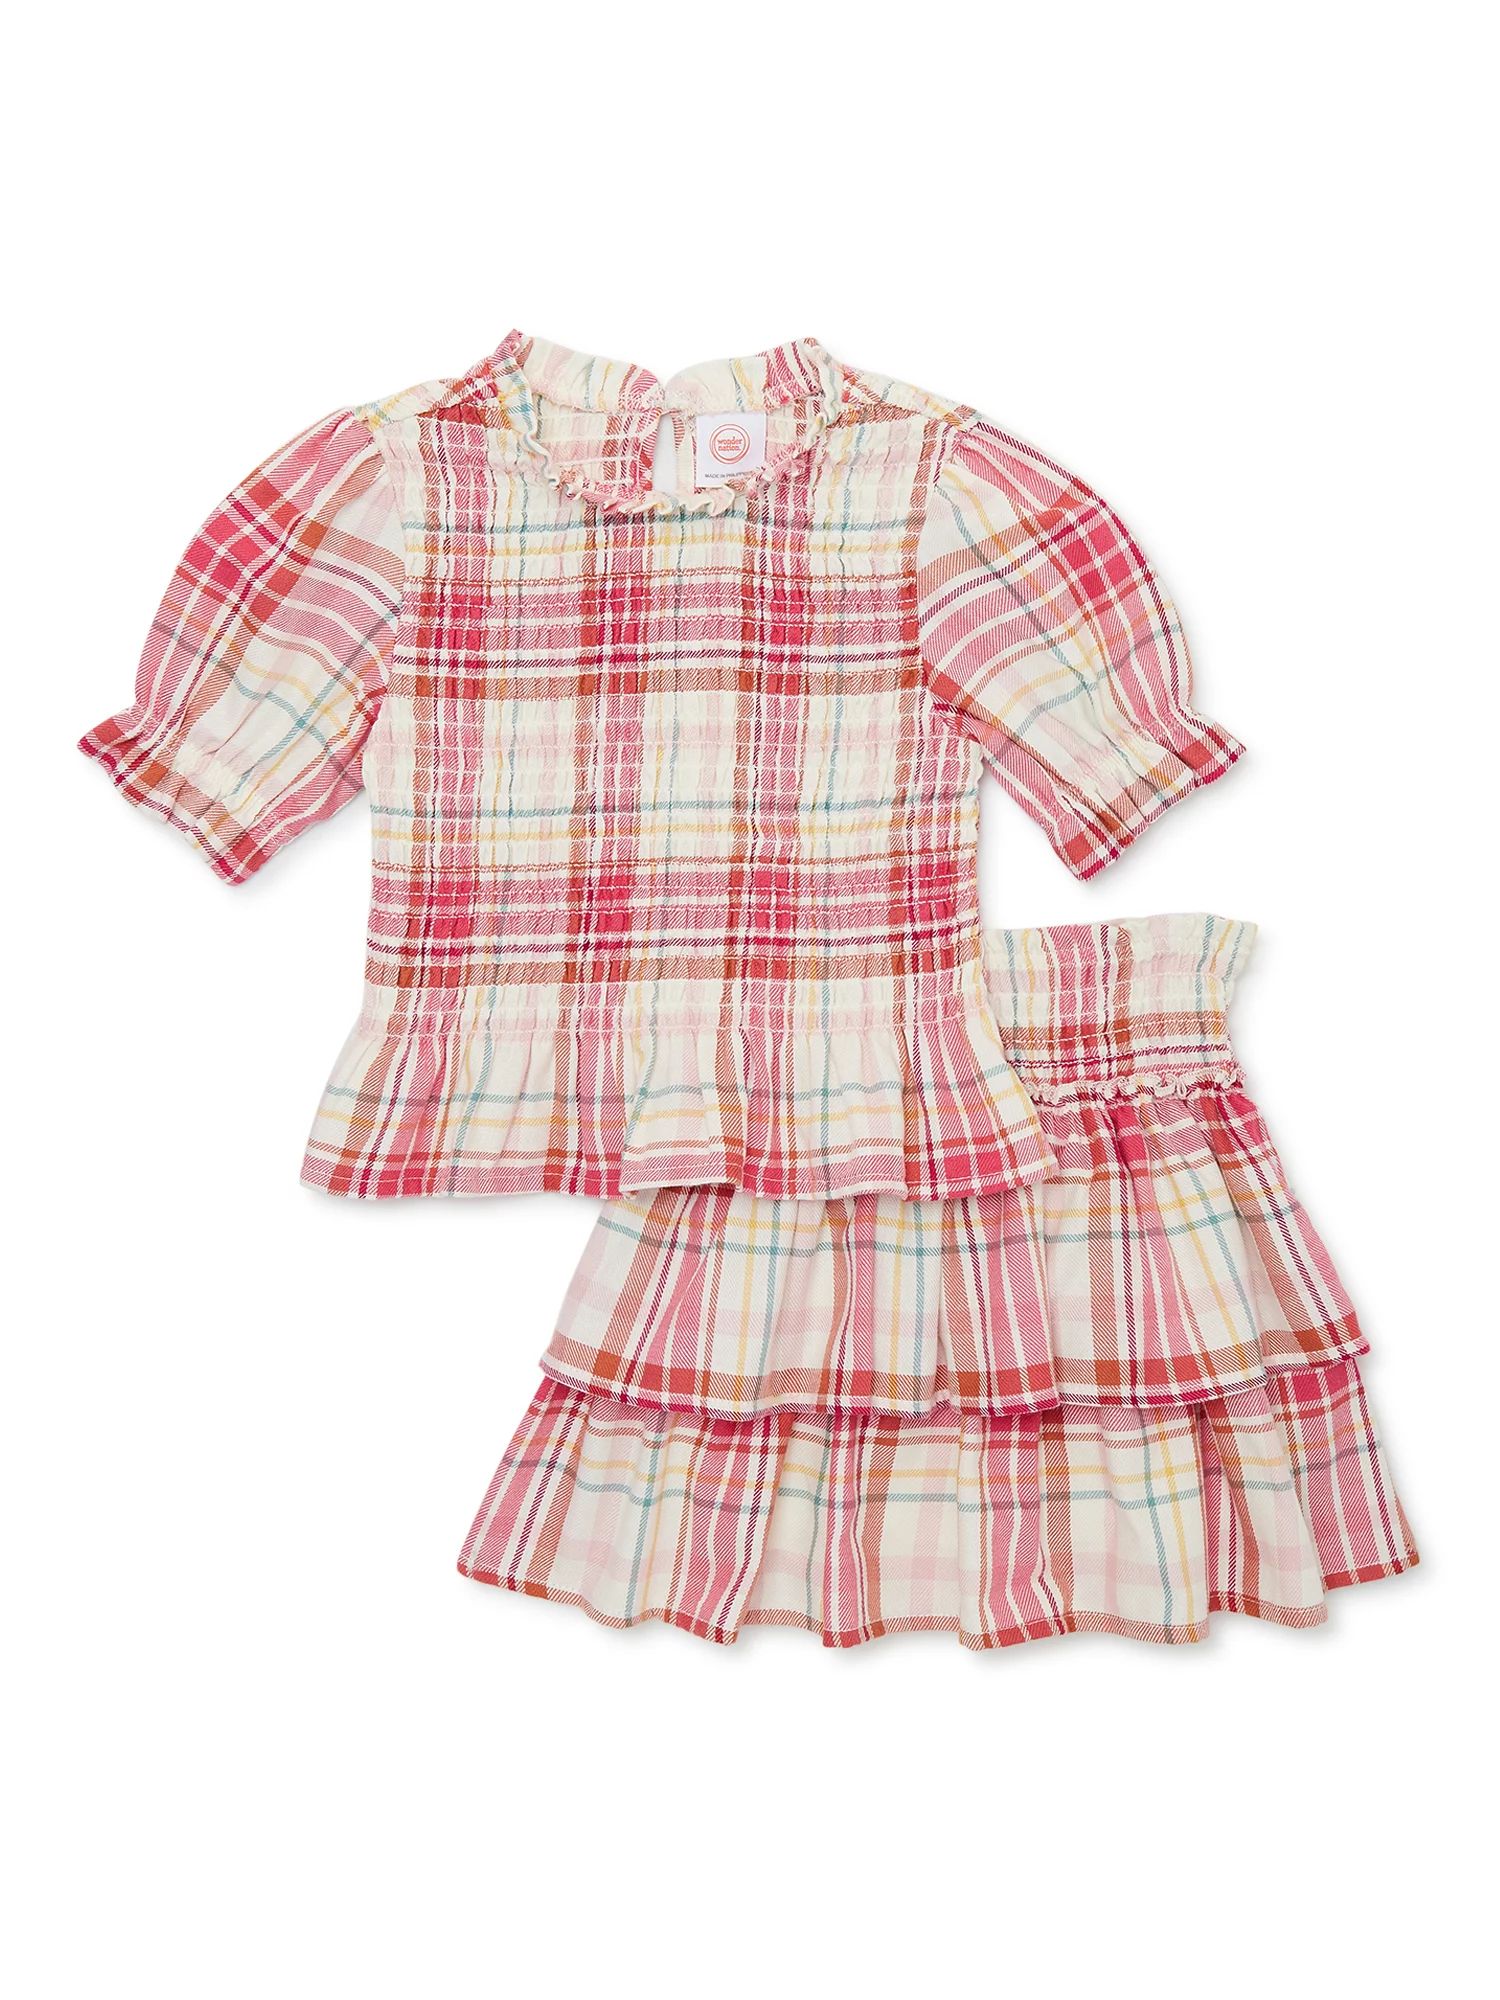 Wonder Nation Baby and Toddler Girl Short Sleeve Top and Skirt, 2-Piece Outfit Set, 12 Months-5T | Walmart (US)